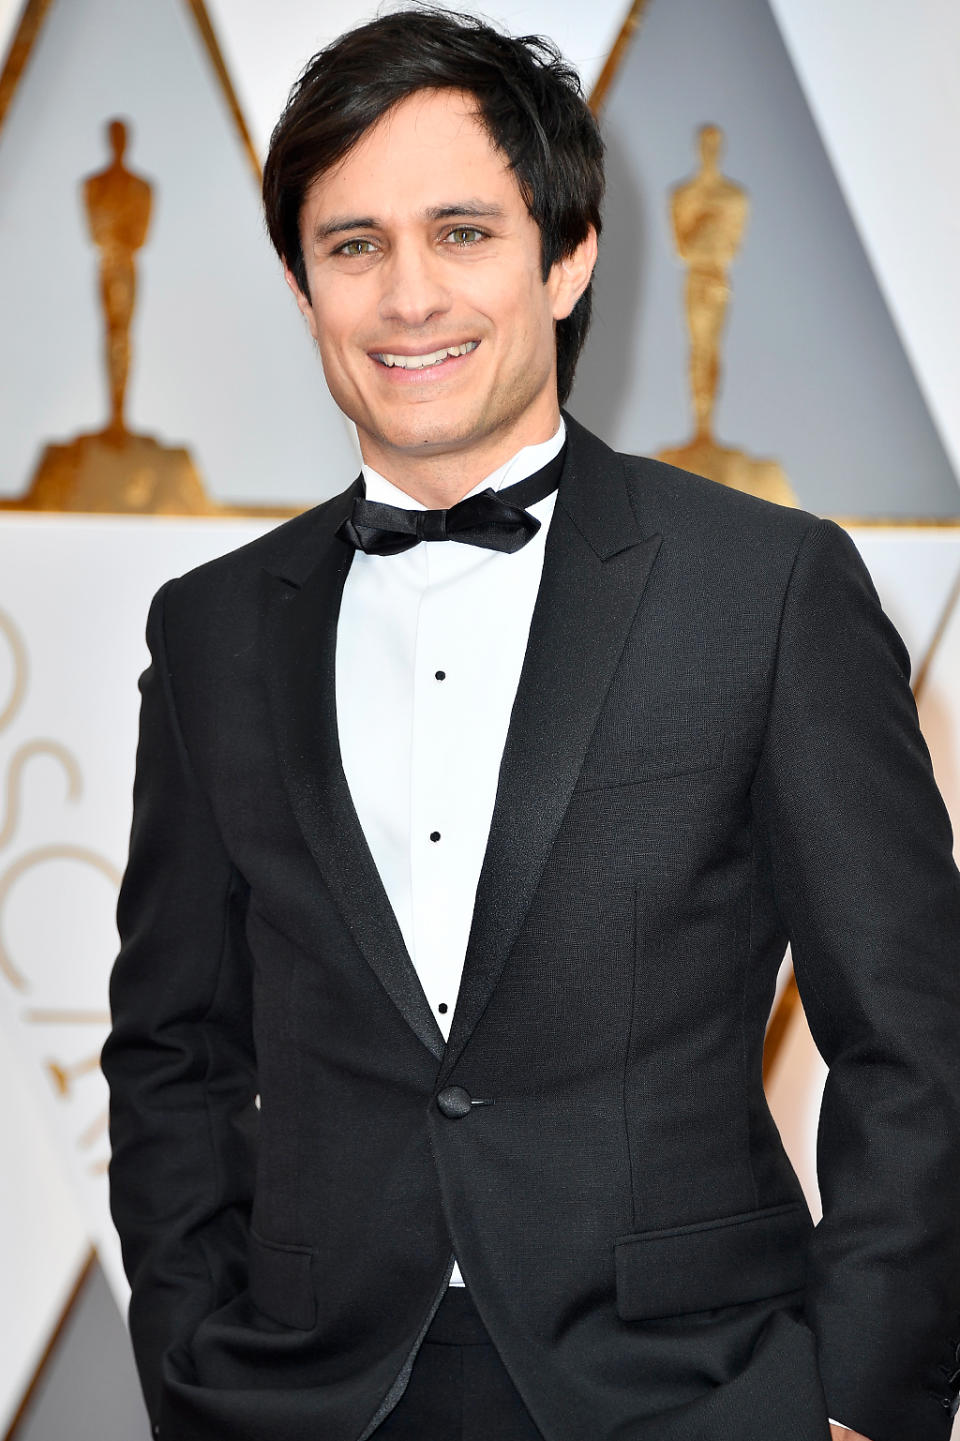 <p>Actor Gael García Bernal attends the 89th Annual Academy Awards at Hollywood & Highland Center on February 26, 2017 in Hollywood, California. (Photo by Frazer Harrison/Getty Images) </p>